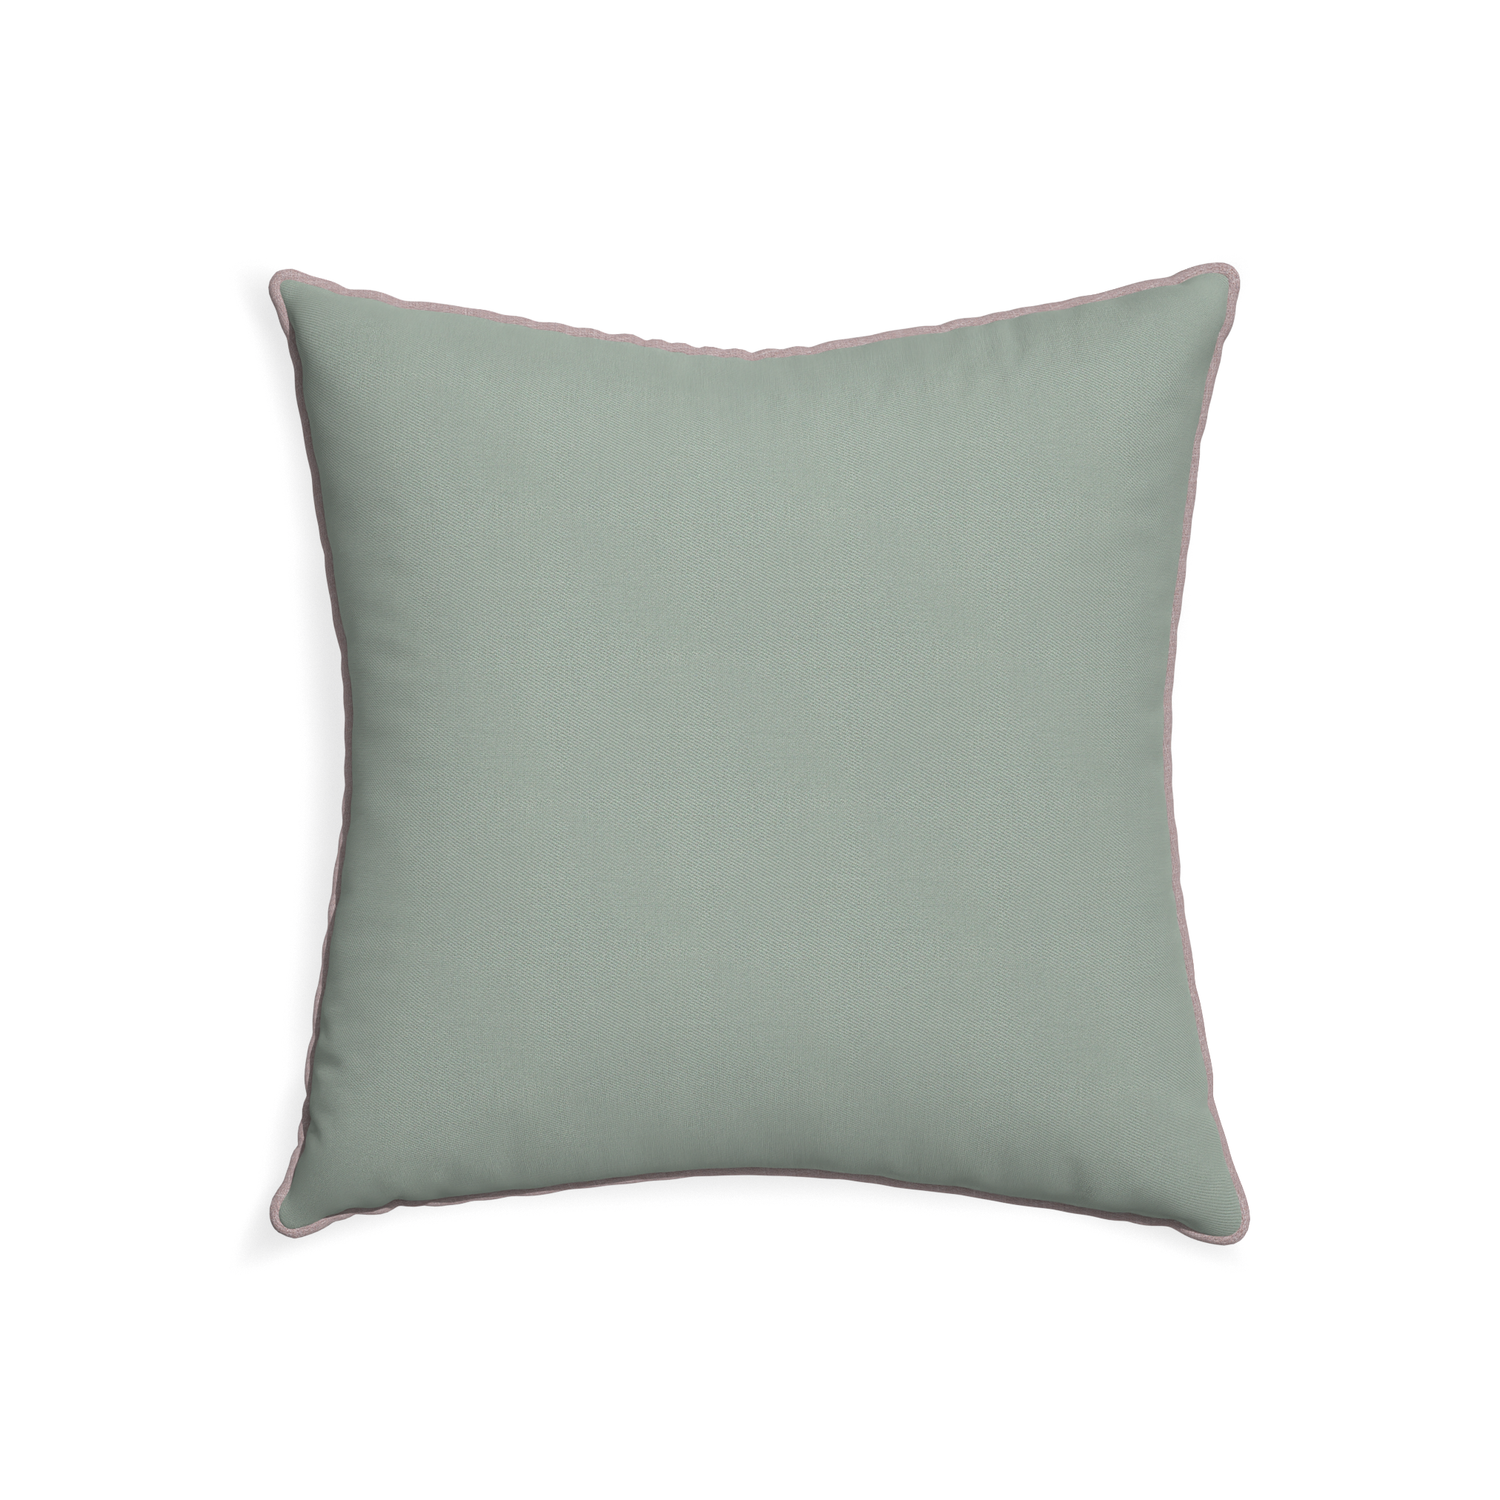 22-square sage custom sage green cottonpillow with orchid piping on white background